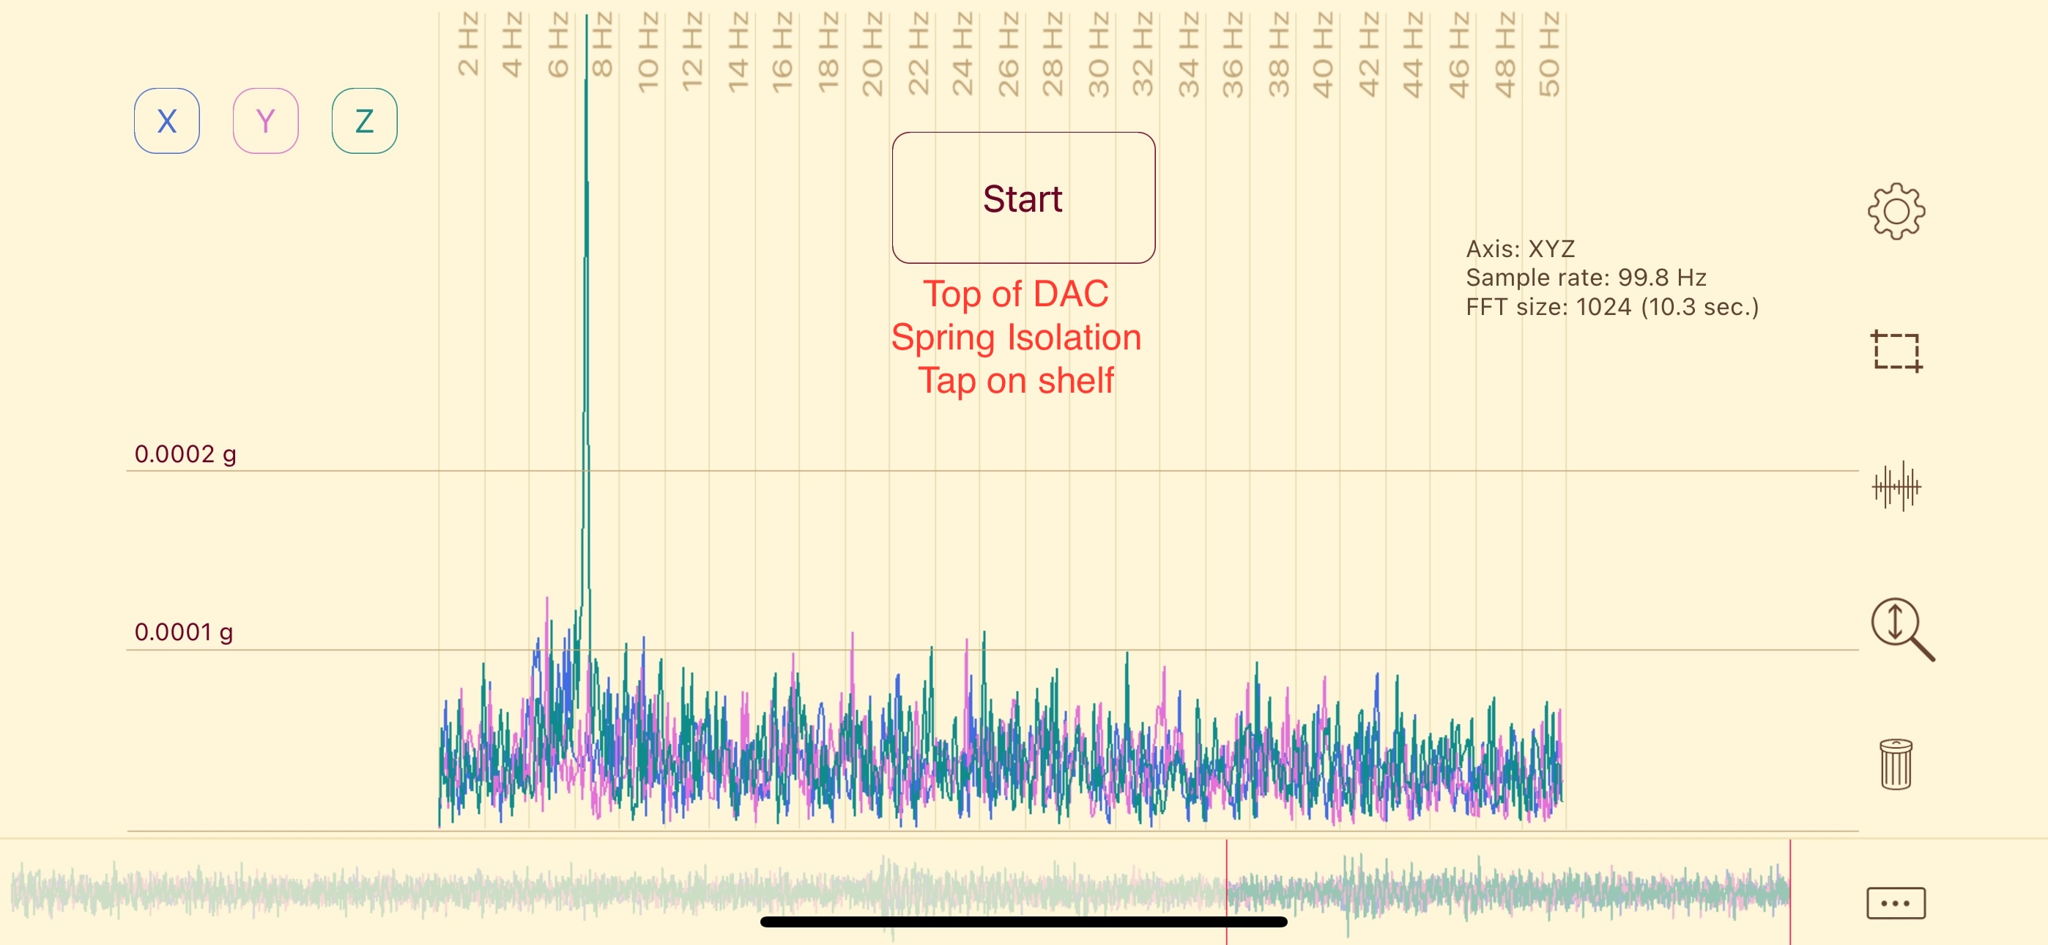 Accelerometer data on top of the DAC